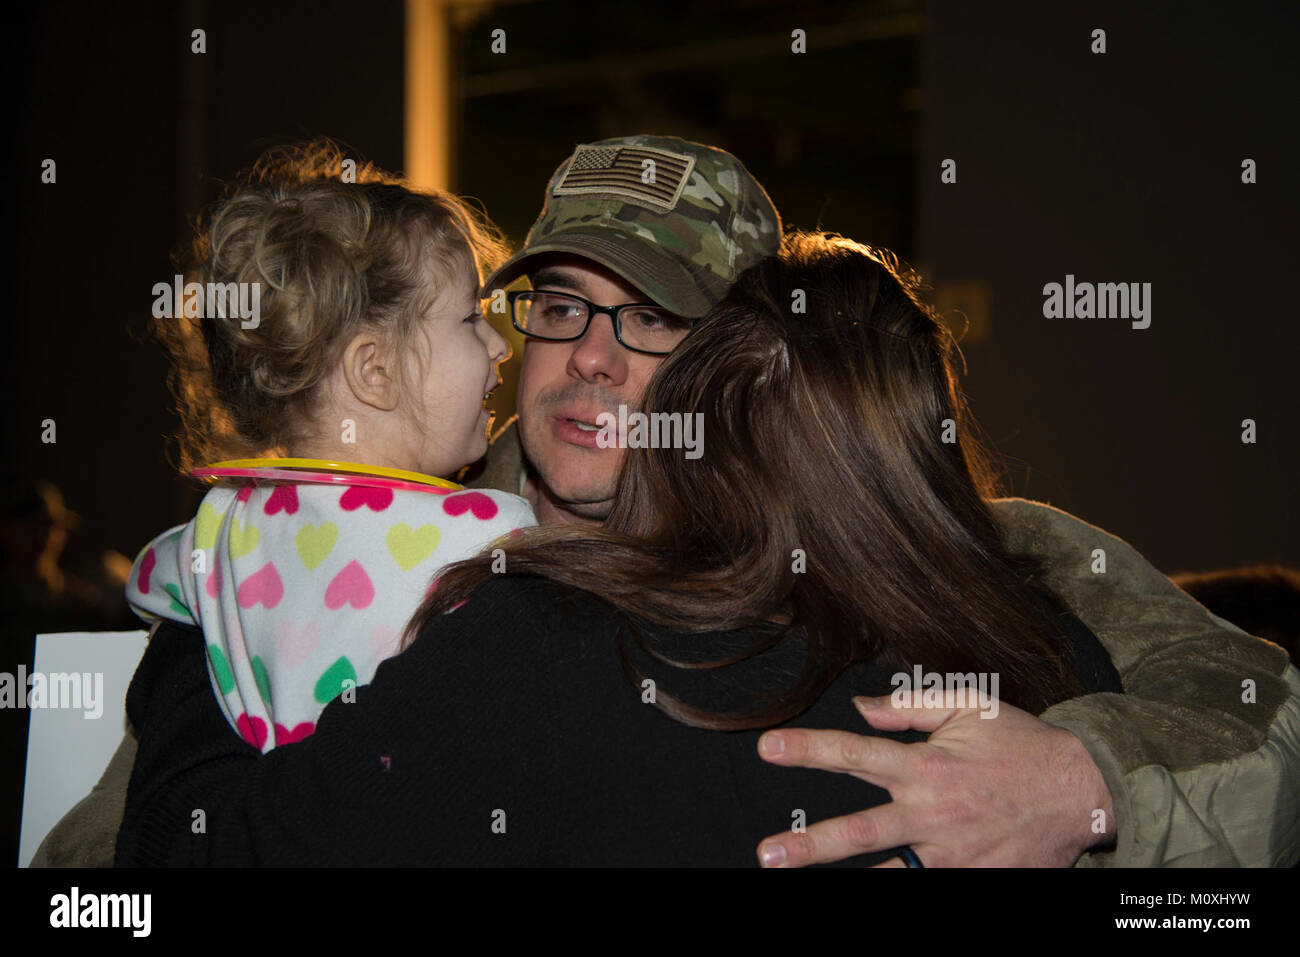 Master Sgt. Michael Johnson, 436th Security Forces Squadron defender, embraces his daughter, Amelia, and wife, Kelly, upon his return home from deployment Jan. 21, 2018, at Dover Air Force Base, Del. Johnson’s team was deployed to the Middle East for six months. (U.S. Air Force Stock Photo